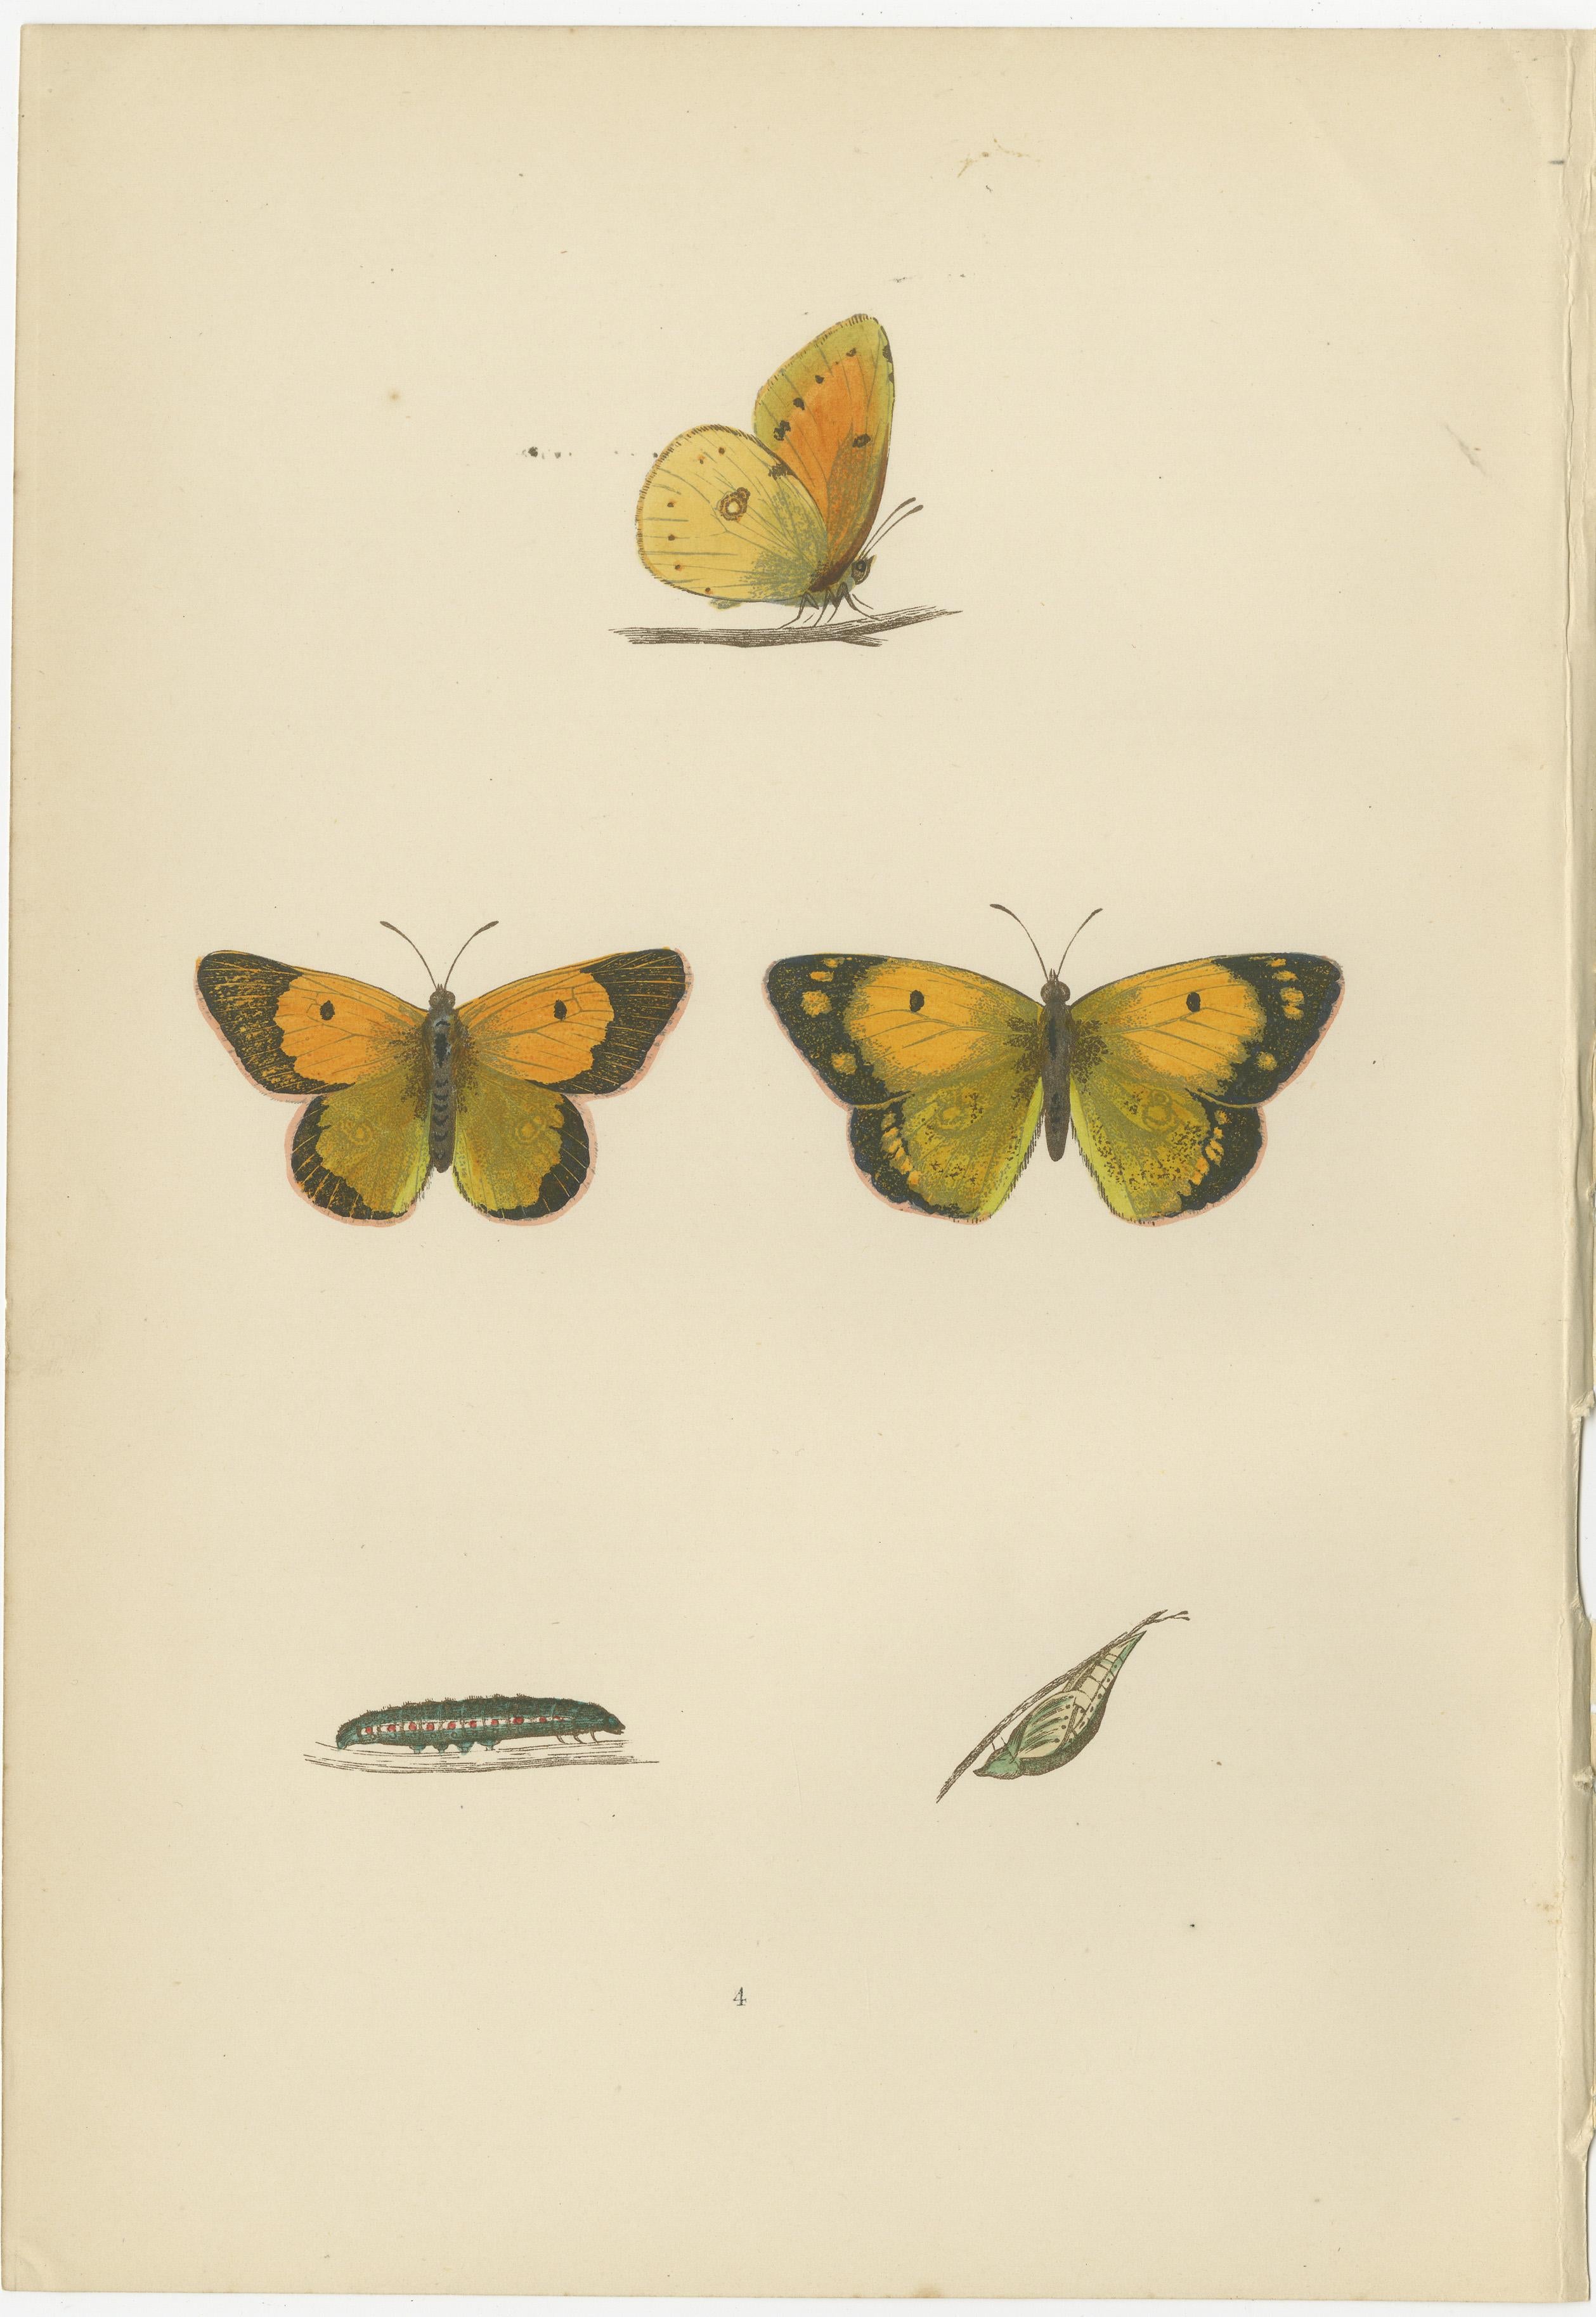 The images are hand-colored plates from 